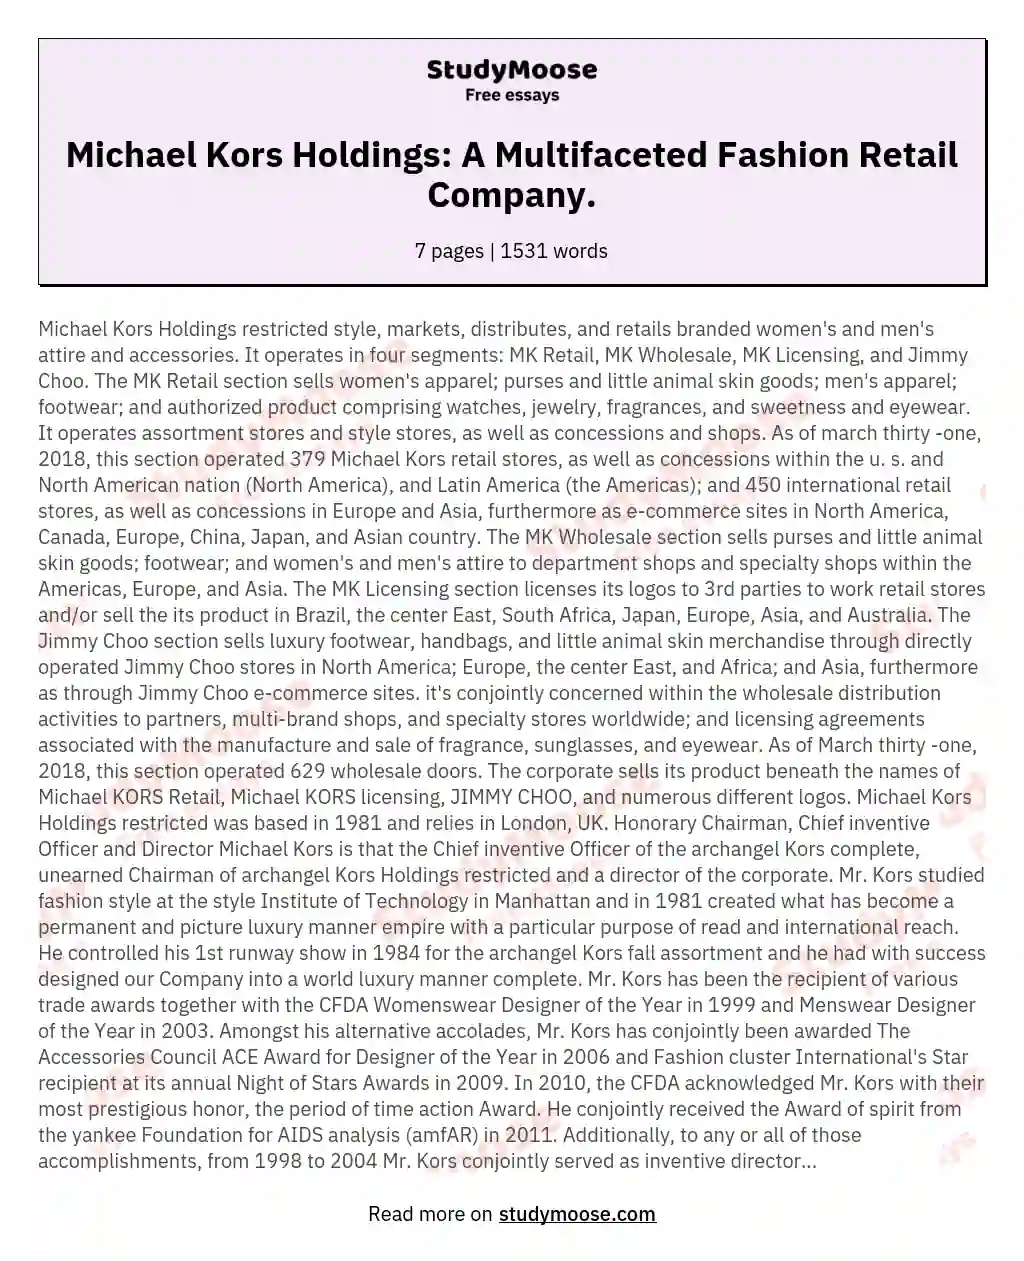 Michael Kors Holdings: A Multifaceted Fashion Retail Company. essay